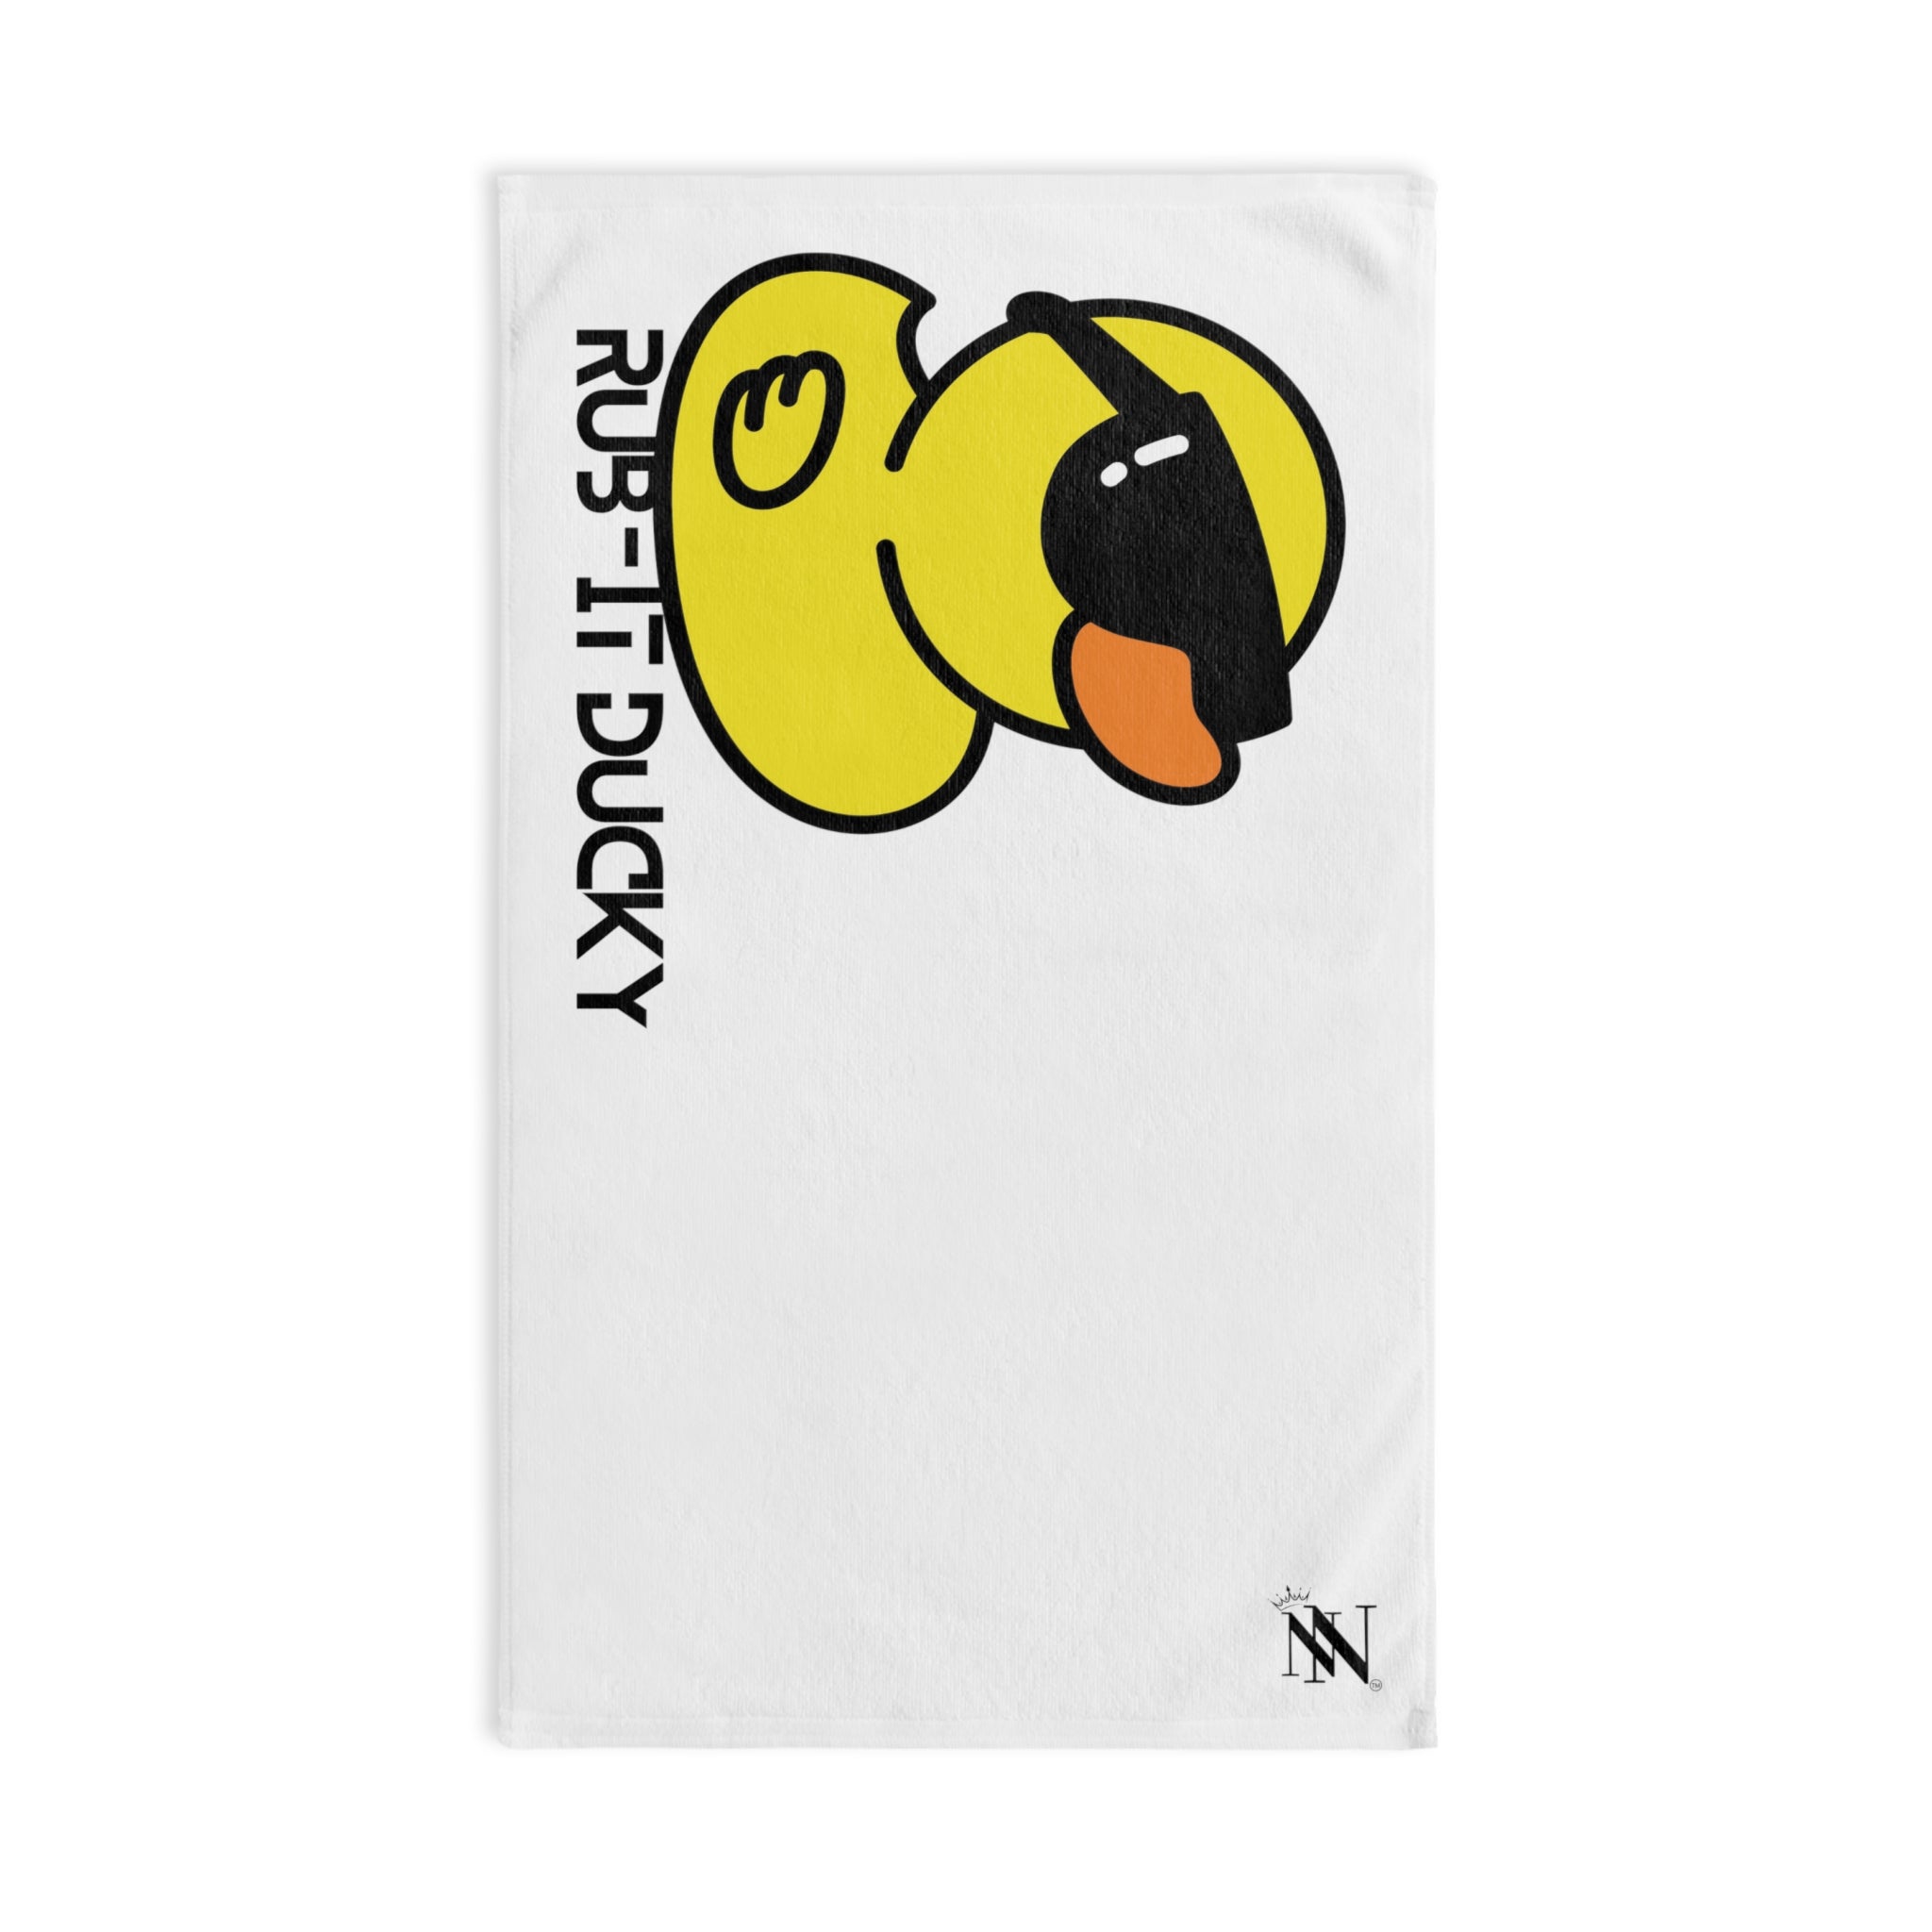 Rub-it Ducky | Nectar Napkins Fun-Flirty Lovers' After Sex Towels NECTAR NAPKINS